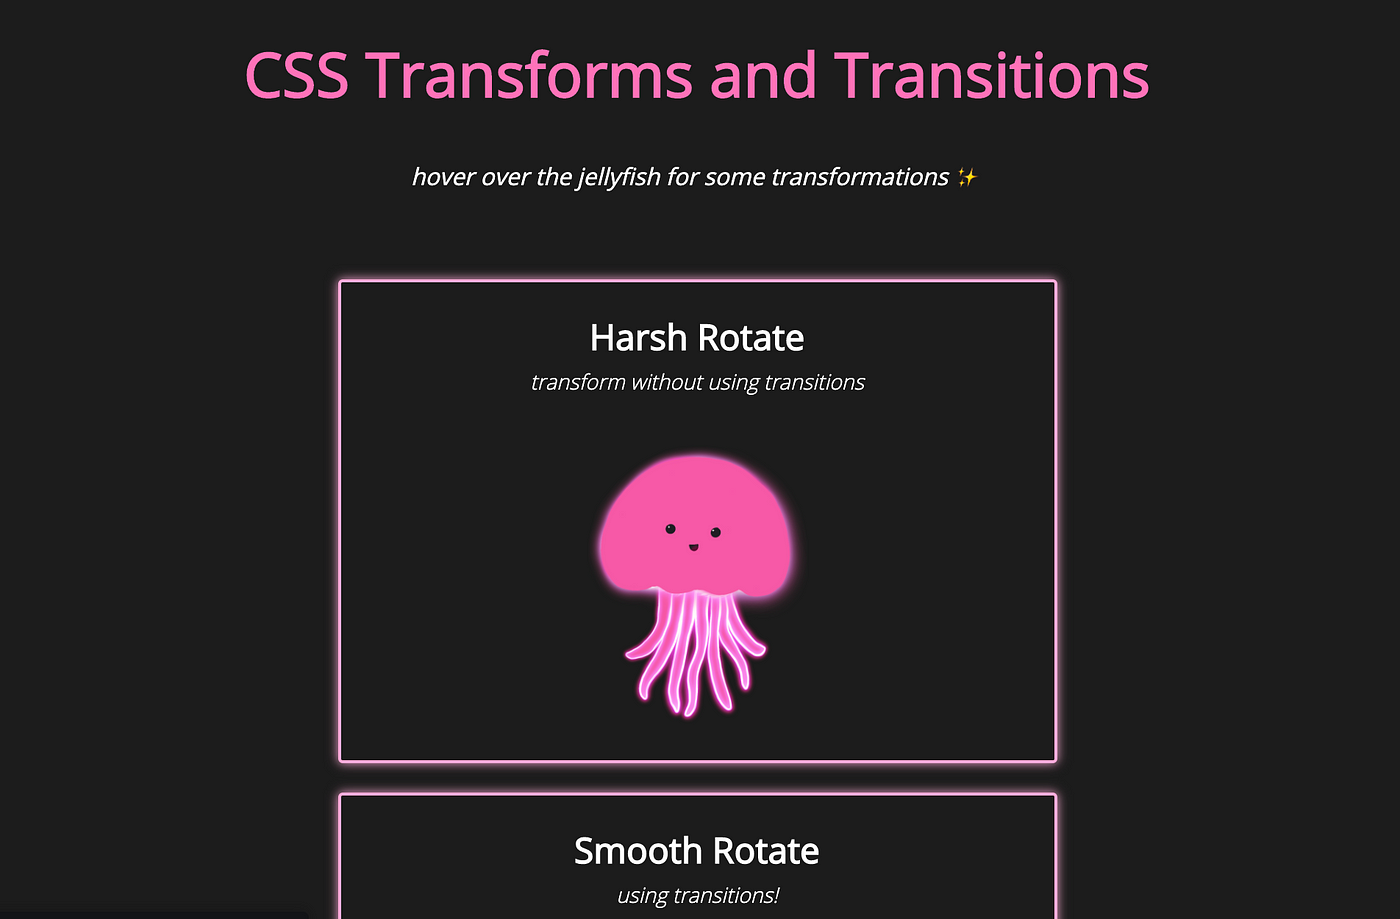 CSS Transforms and Transitions: A Beginner's Guide | by Alexandra Radevich  | The Startup | Medium